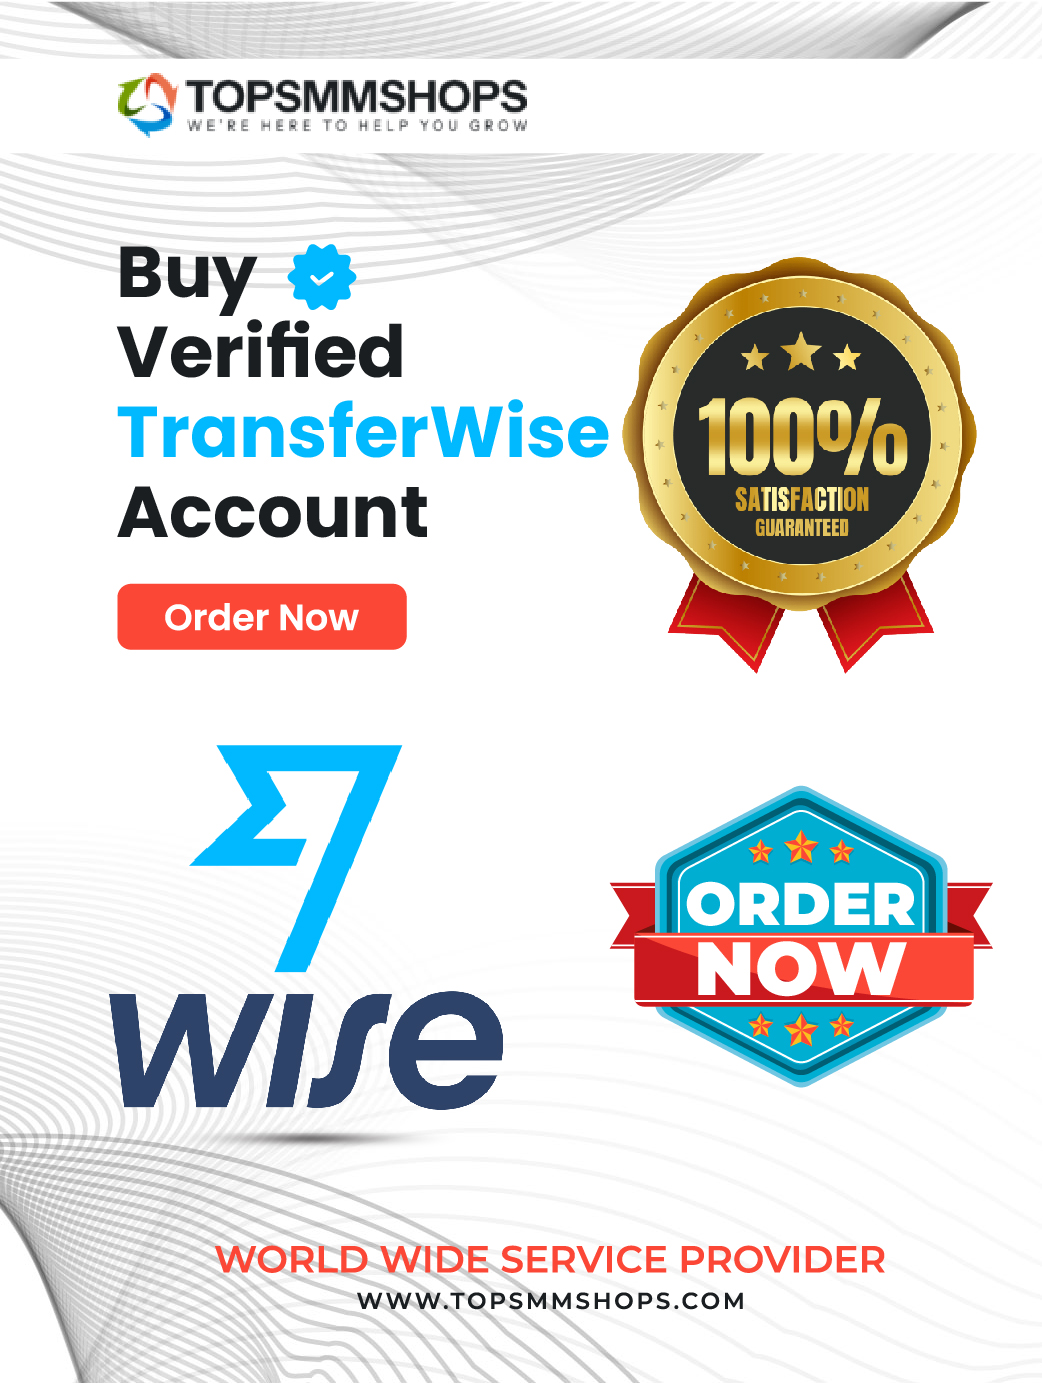 Buy Verified TransferWise Account - TopSmmShops